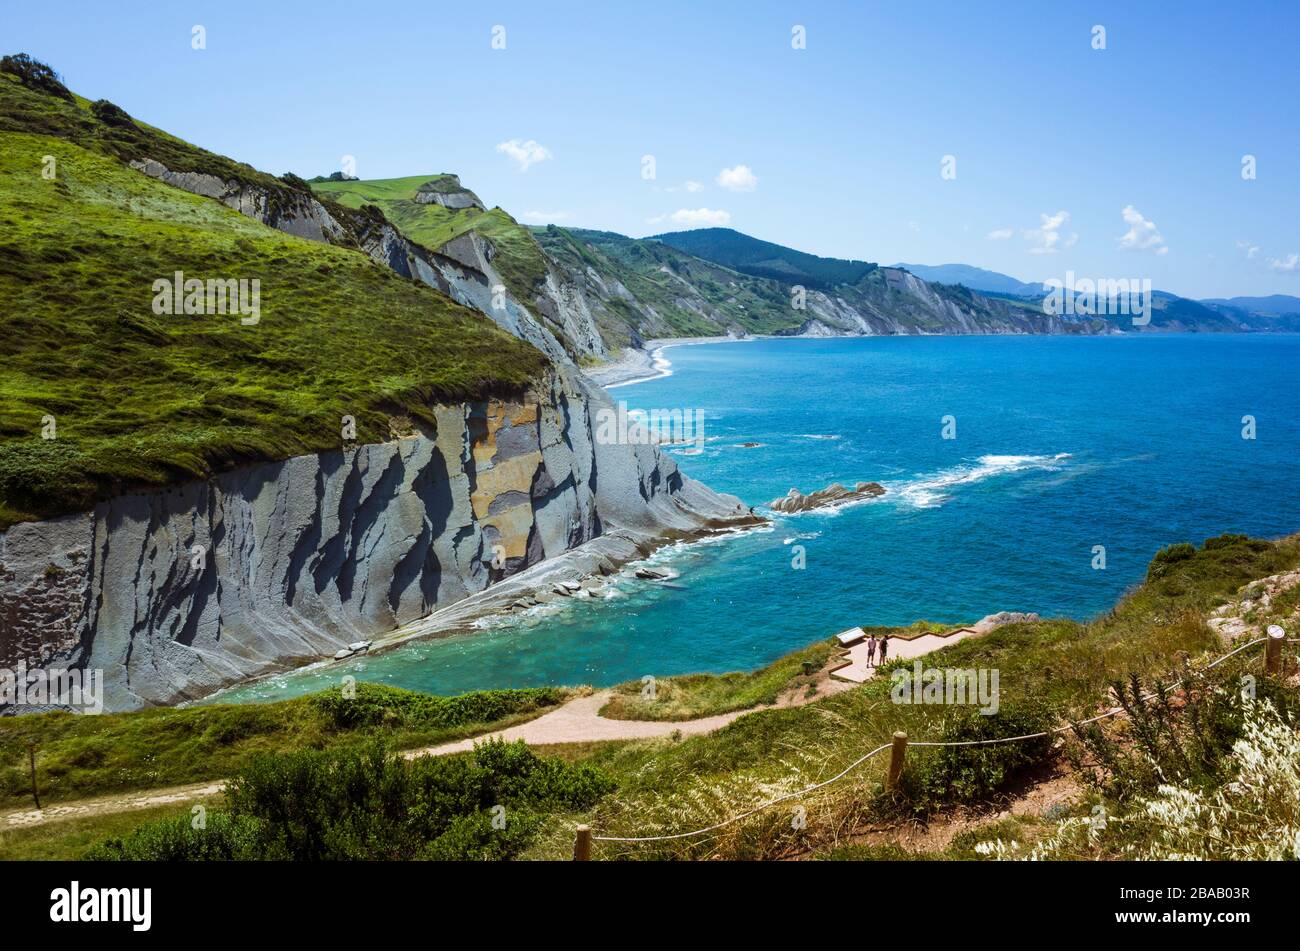 Zumaia, Gipuzkoa, Basque Country, Spain - July 15th, 2019 : Seascape with cliffs made of flysch rock. Stock Photo